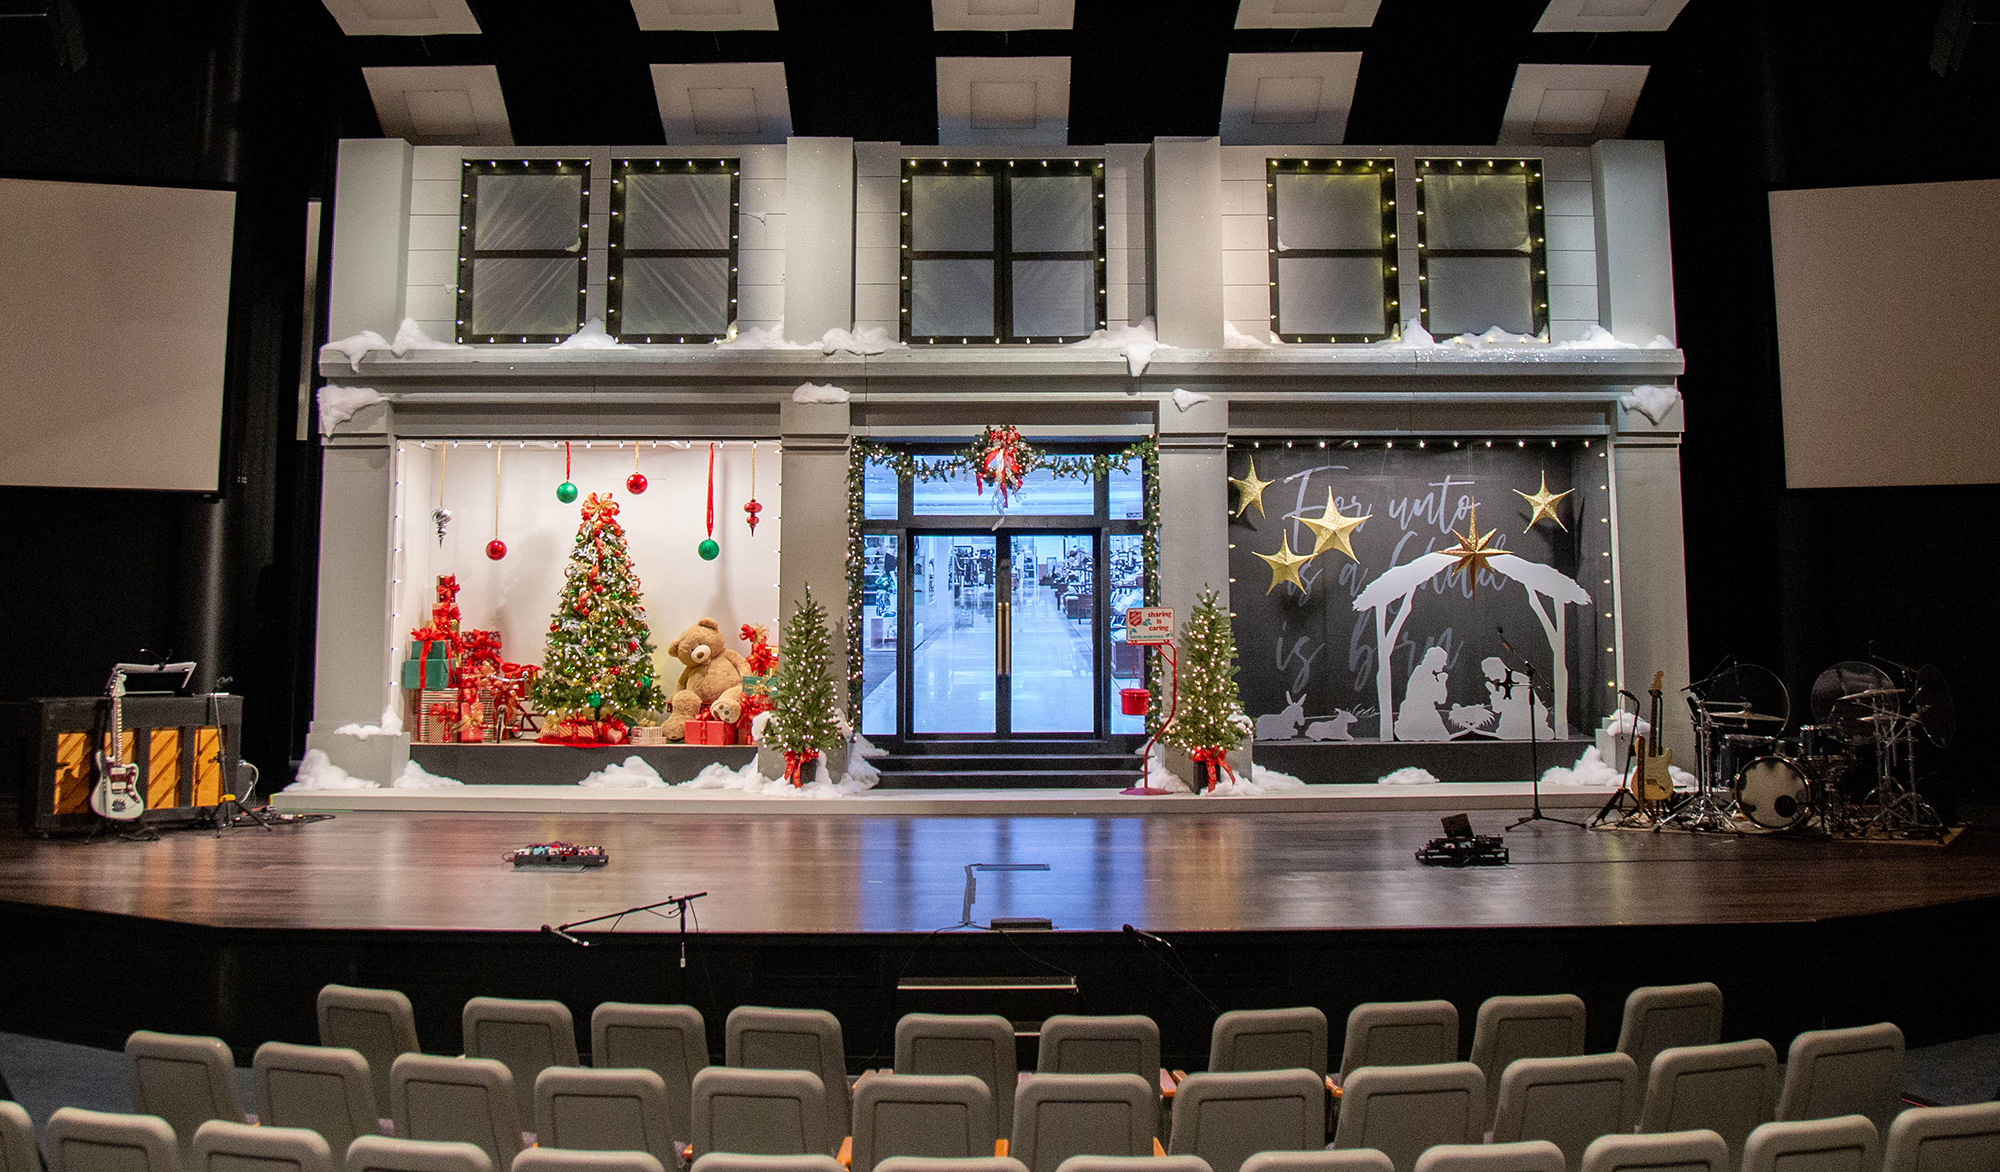 NYC Christmas - Church Stage Design Ideas - Scenic sets and stage